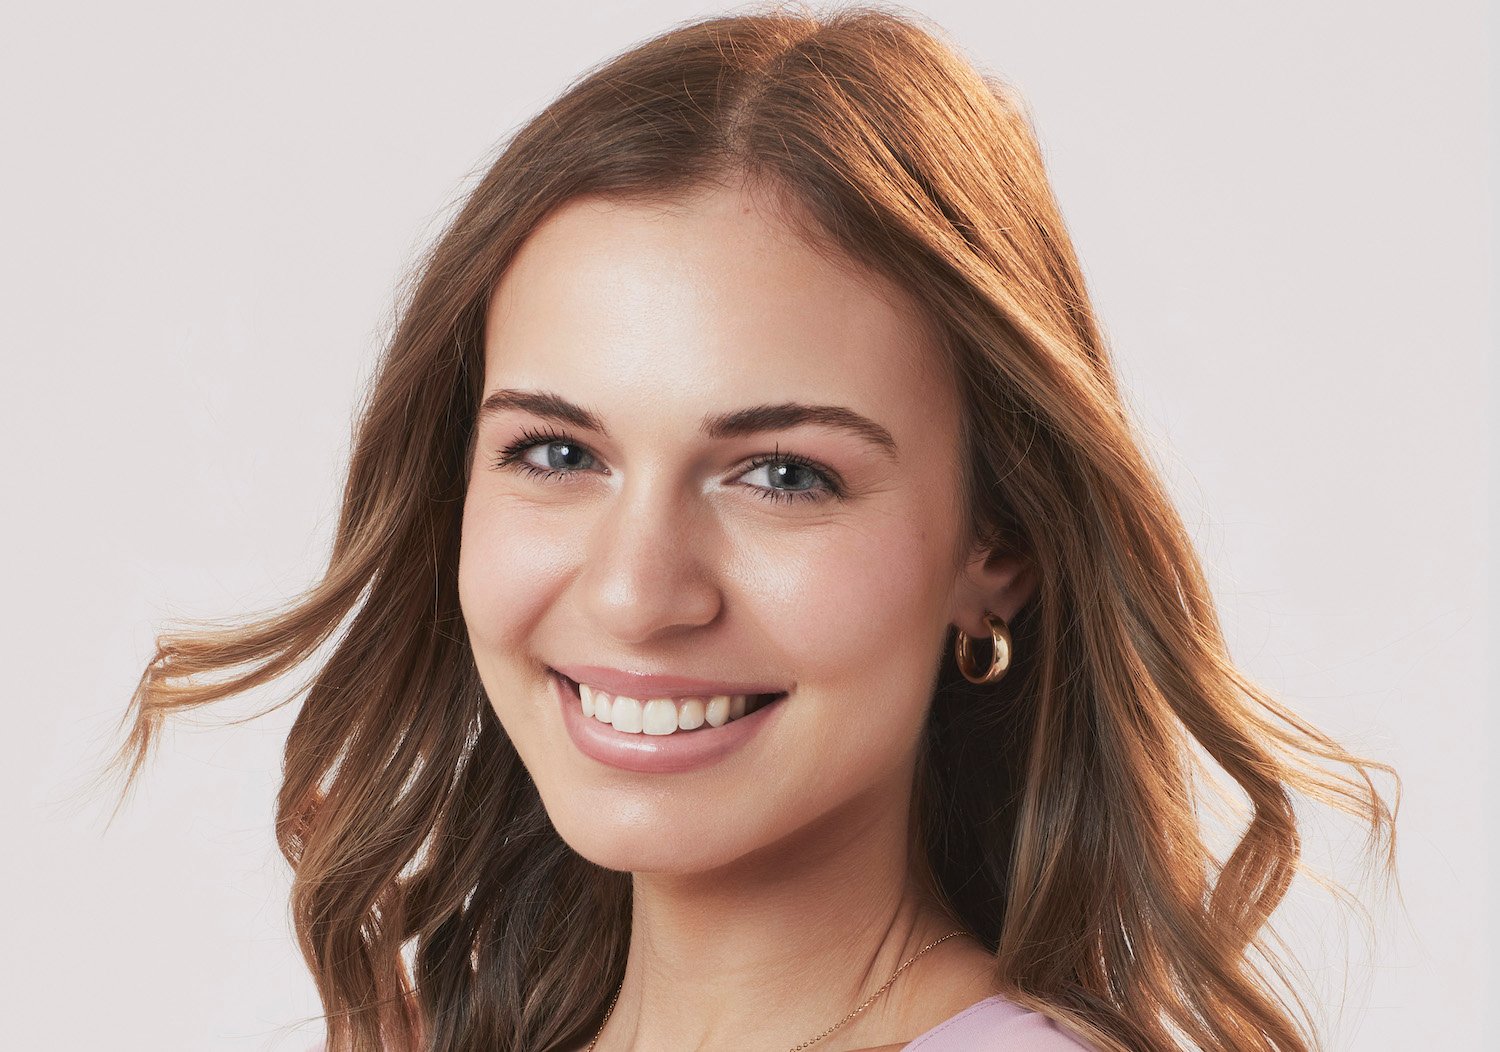 'The Bachelor' star Jess Girod in her official headshot for the show.